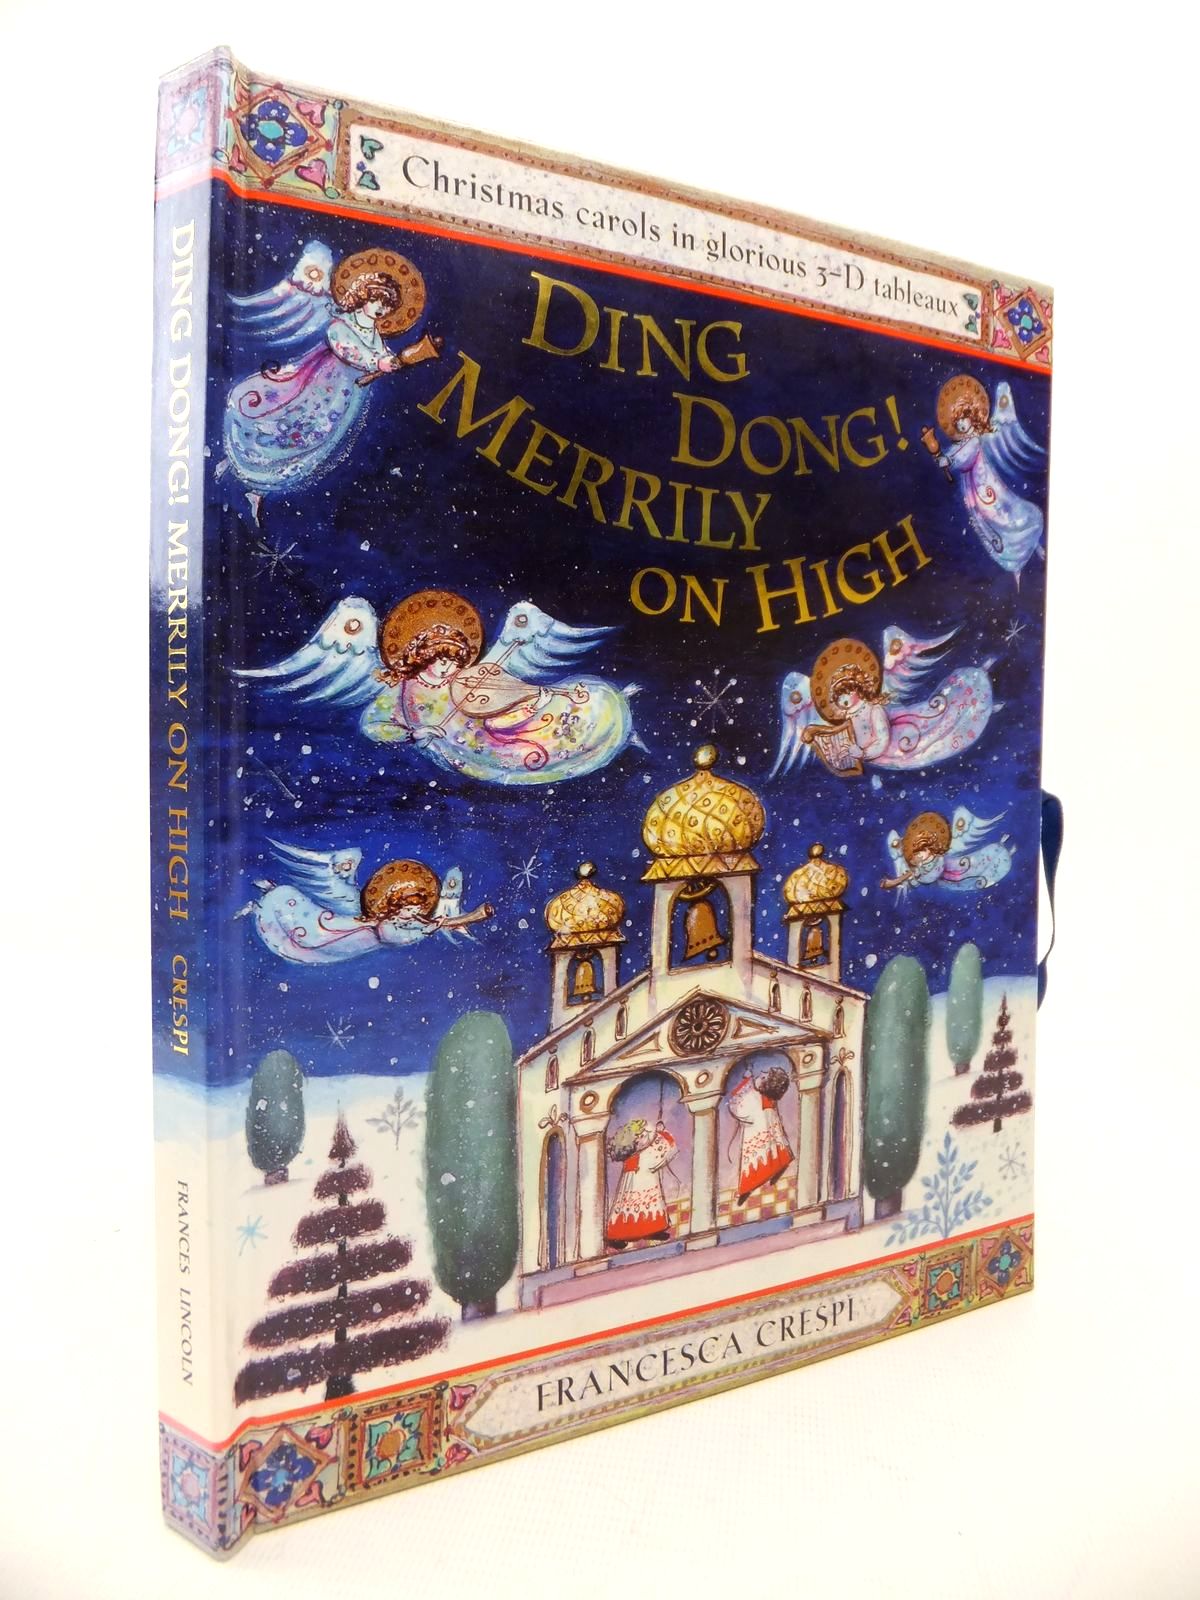 Photo of DING DONG! MERRILY ON HIGH written by Crespi, Francesca illustrated by Crespi, Francesca published by Frances Lincoln (STOCK CODE: 1813667)  for sale by Stella & Rose's Books